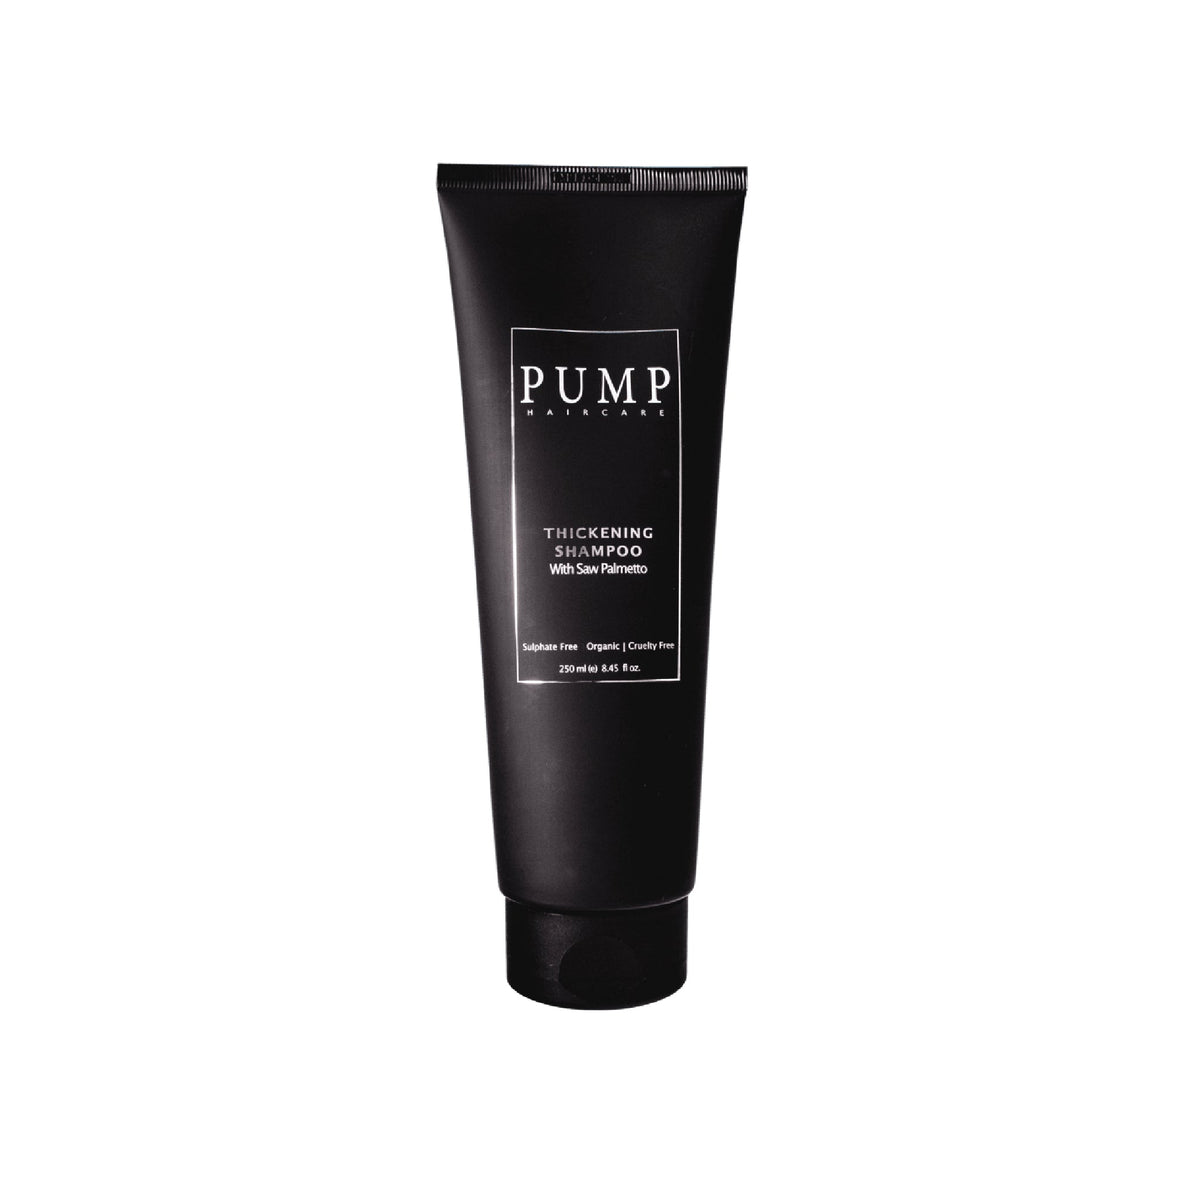 Pump Thickening Shampoo - Haircare Superstore